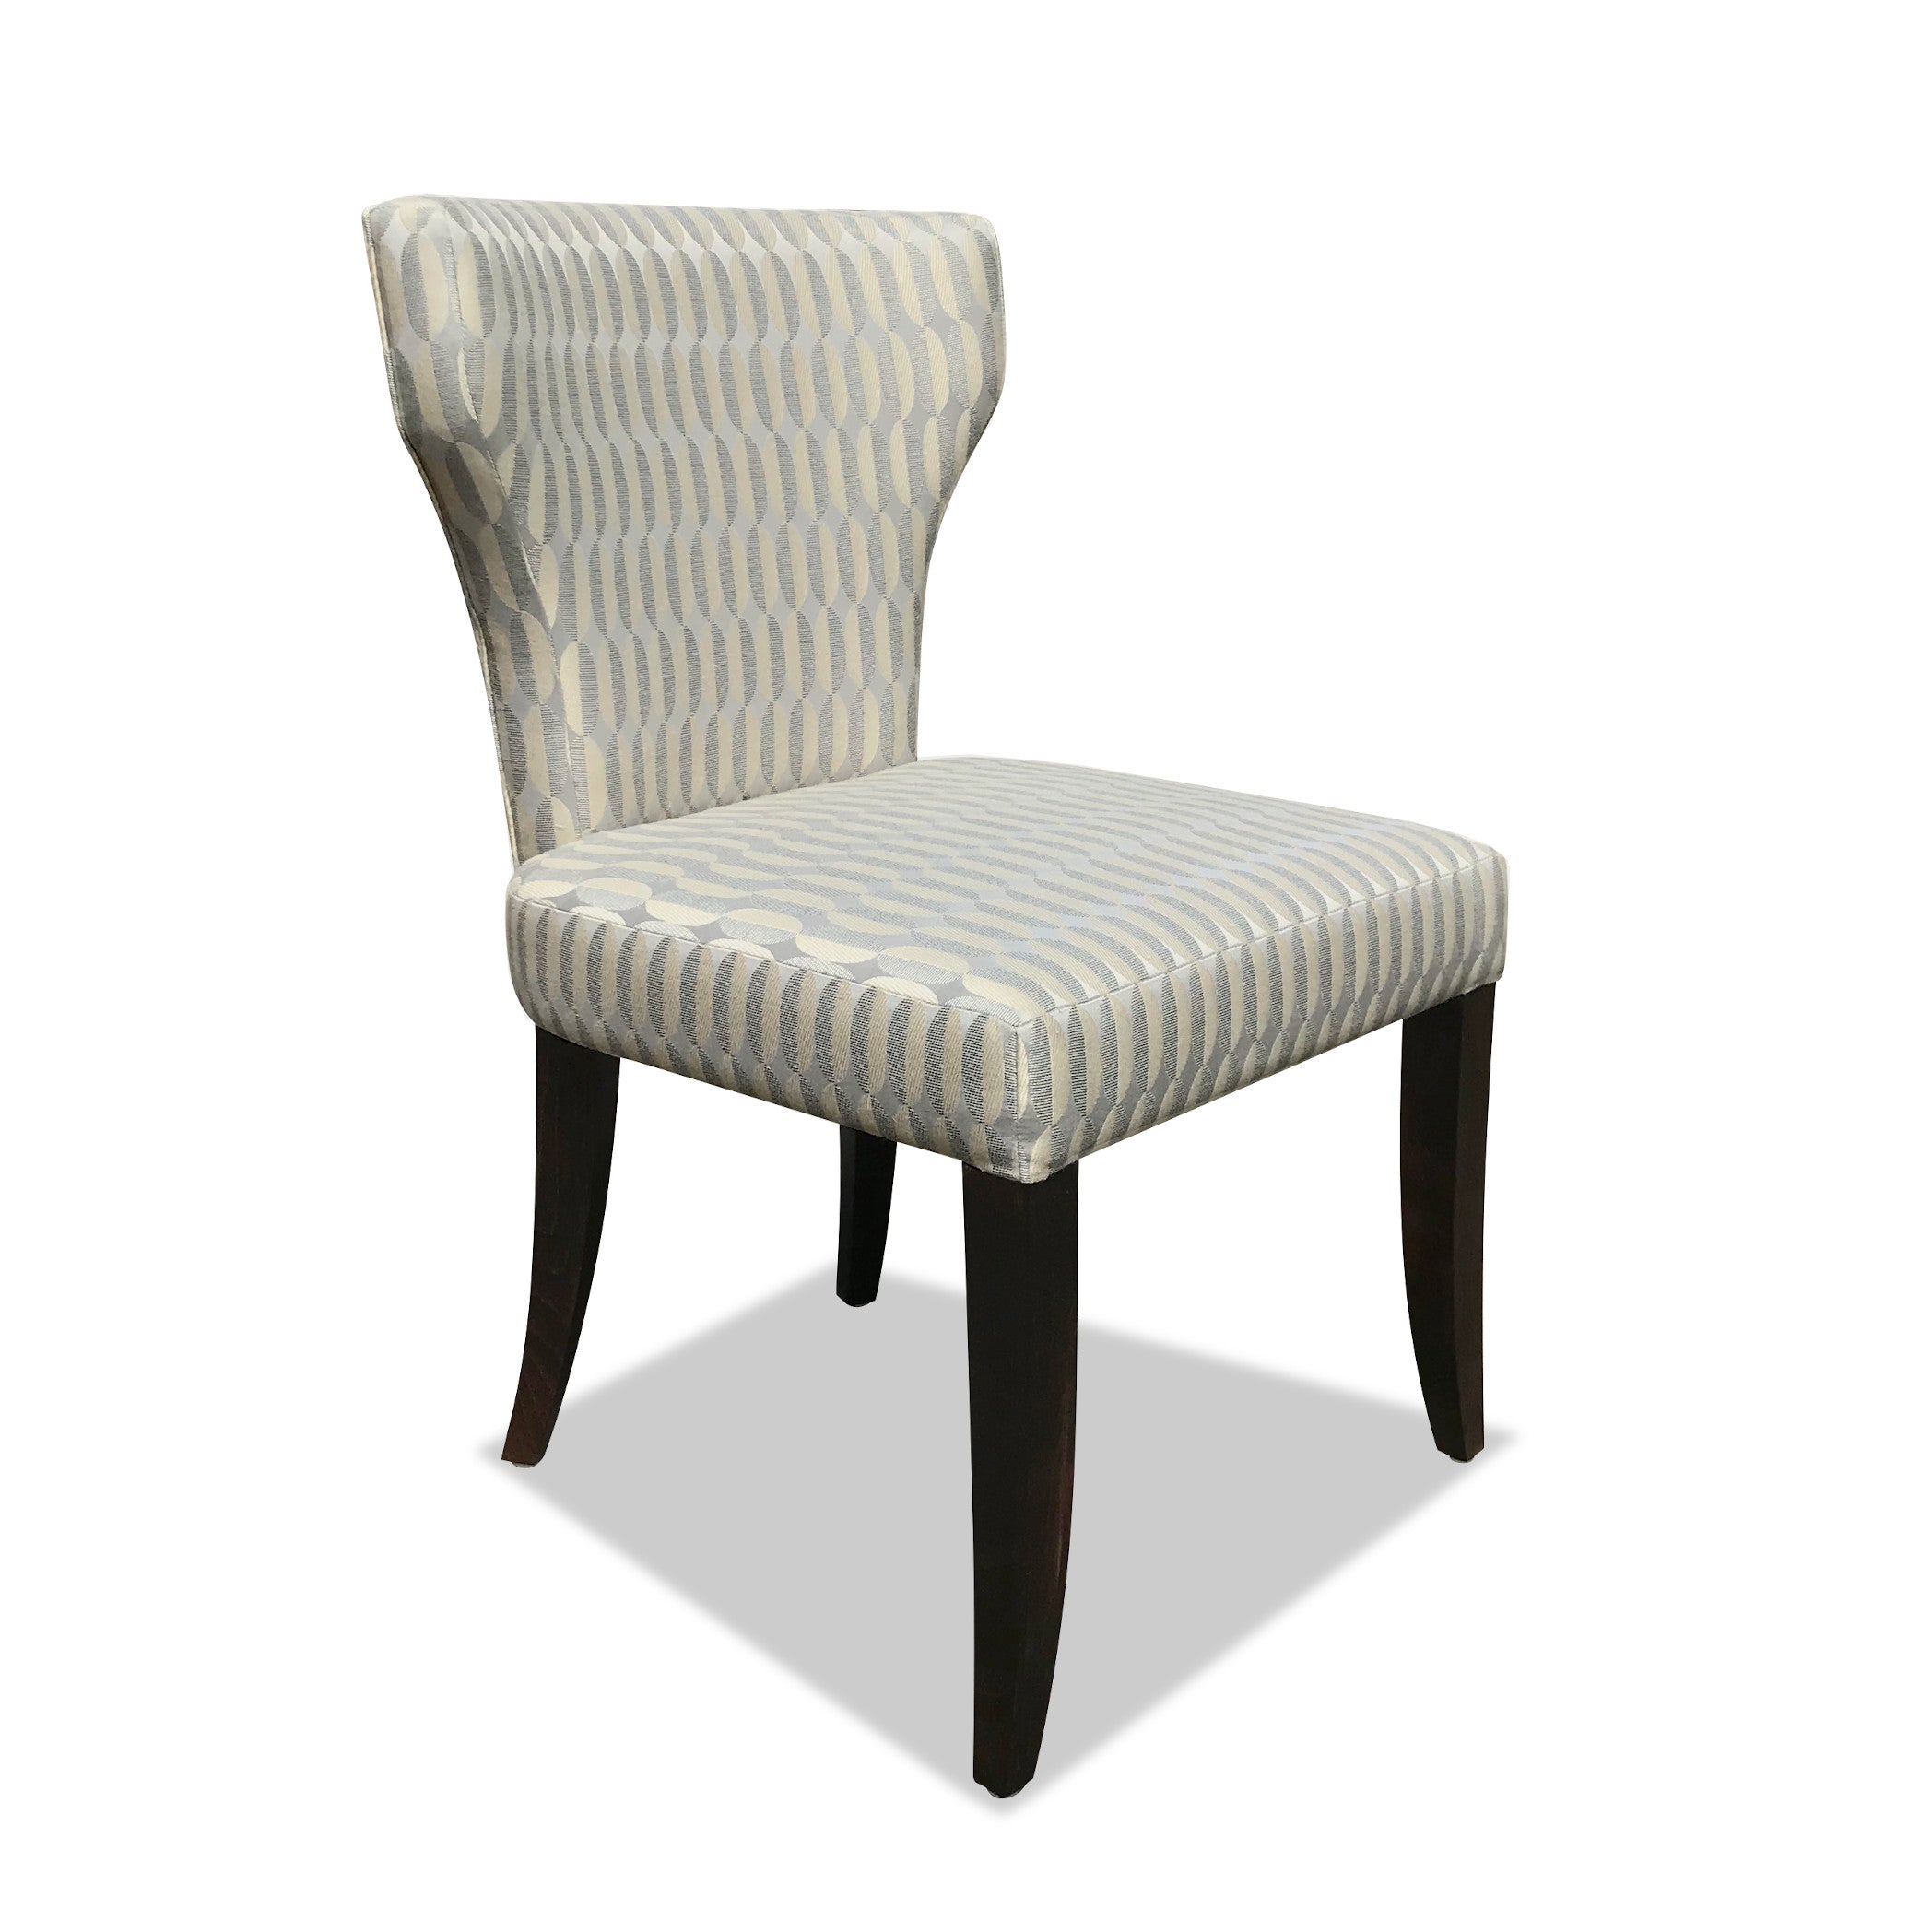 Cantwell Dining Chair